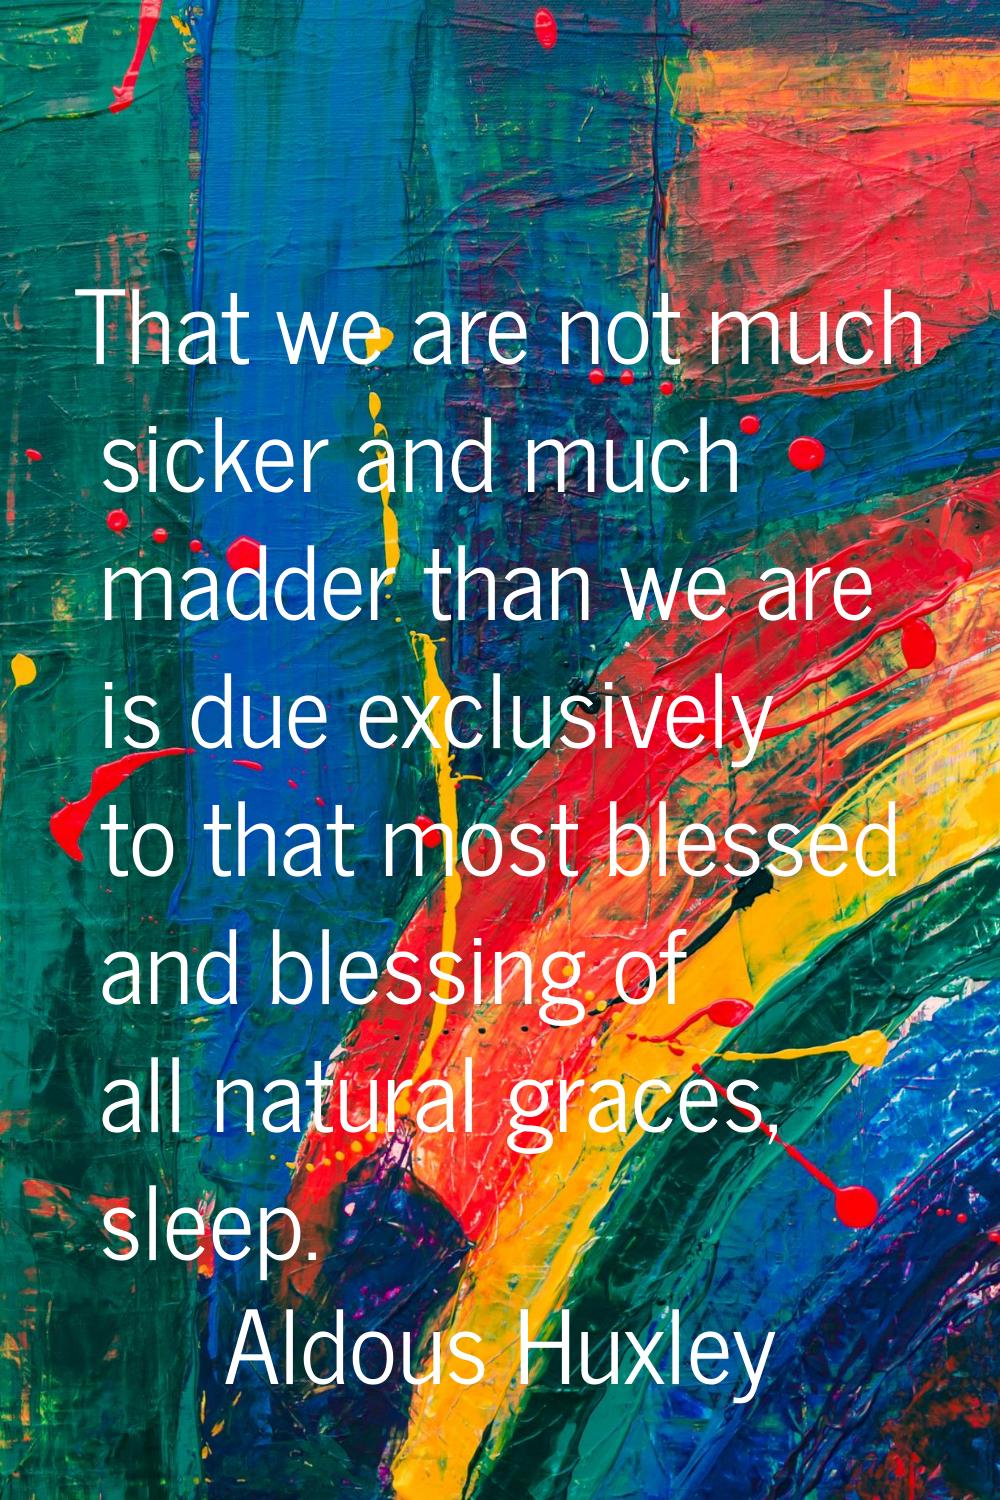 That we are not much sicker and much madder than we are is due exclusively to that most blessed and